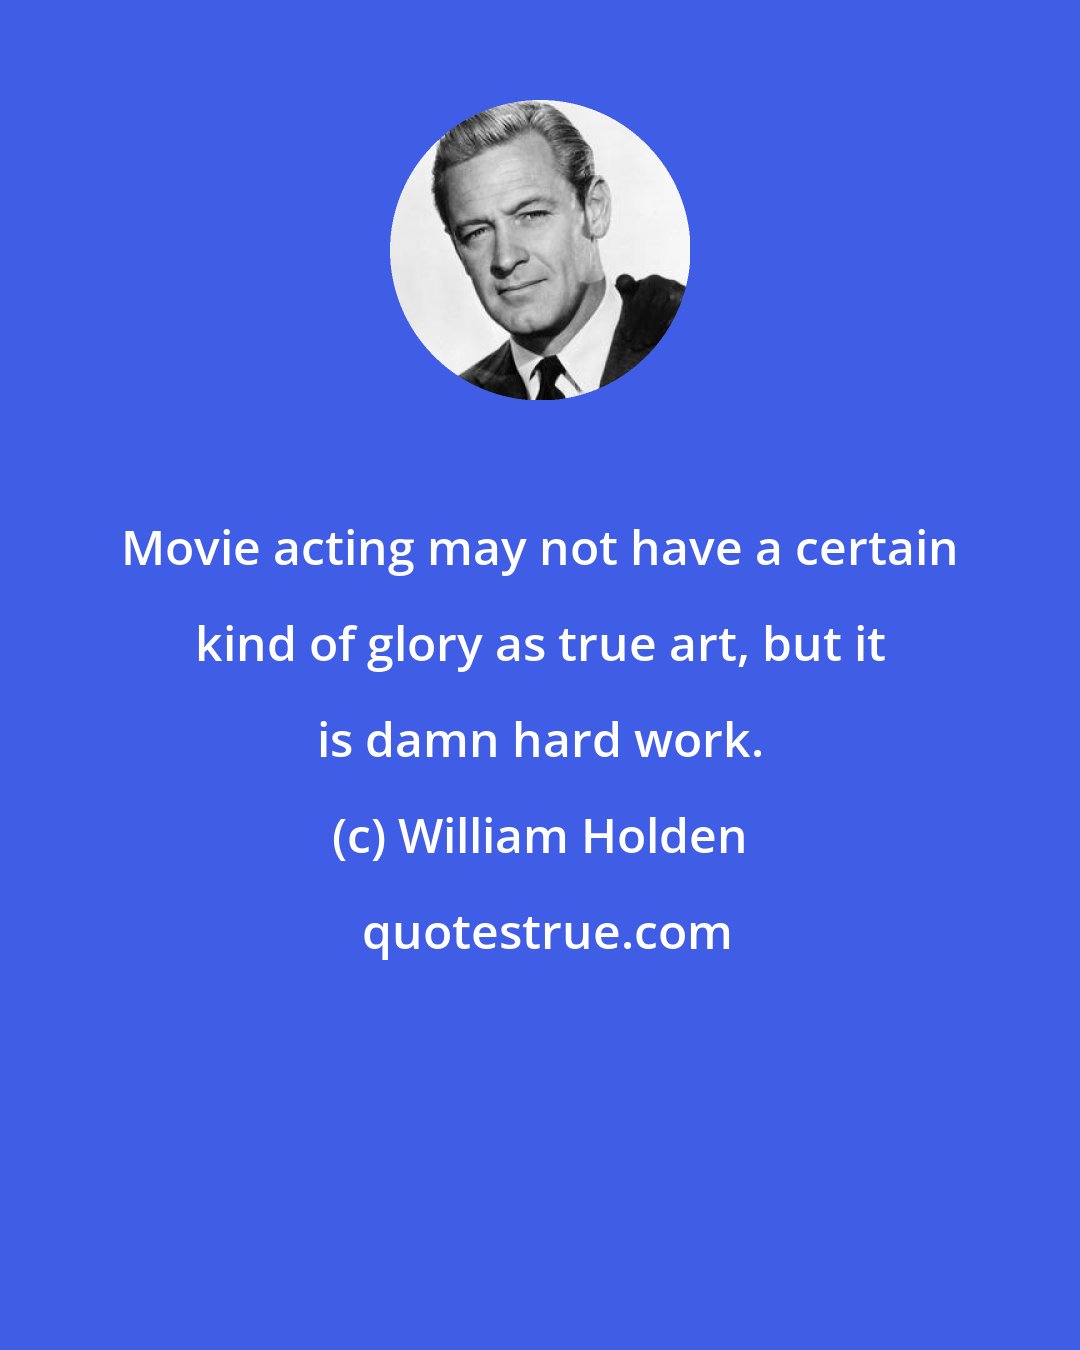 William Holden: Movie acting may not have a certain kind of glory as true art, but it is damn hard work.